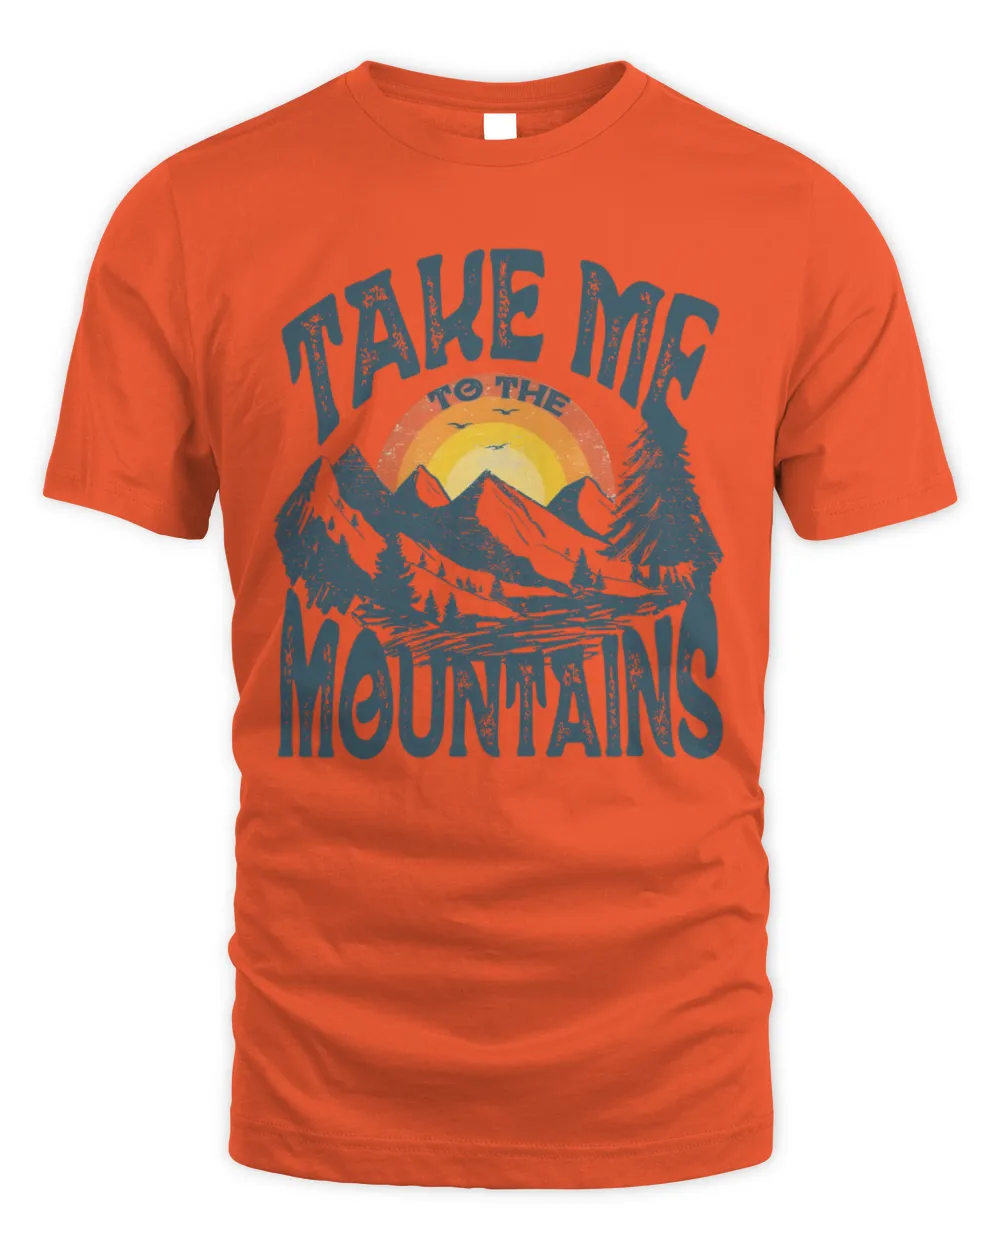 Take Me to the Mountains Tee, Mountains T-shirt, Outsider, Vintage Inspired Cotton T-shirt, Unisex T-shirt